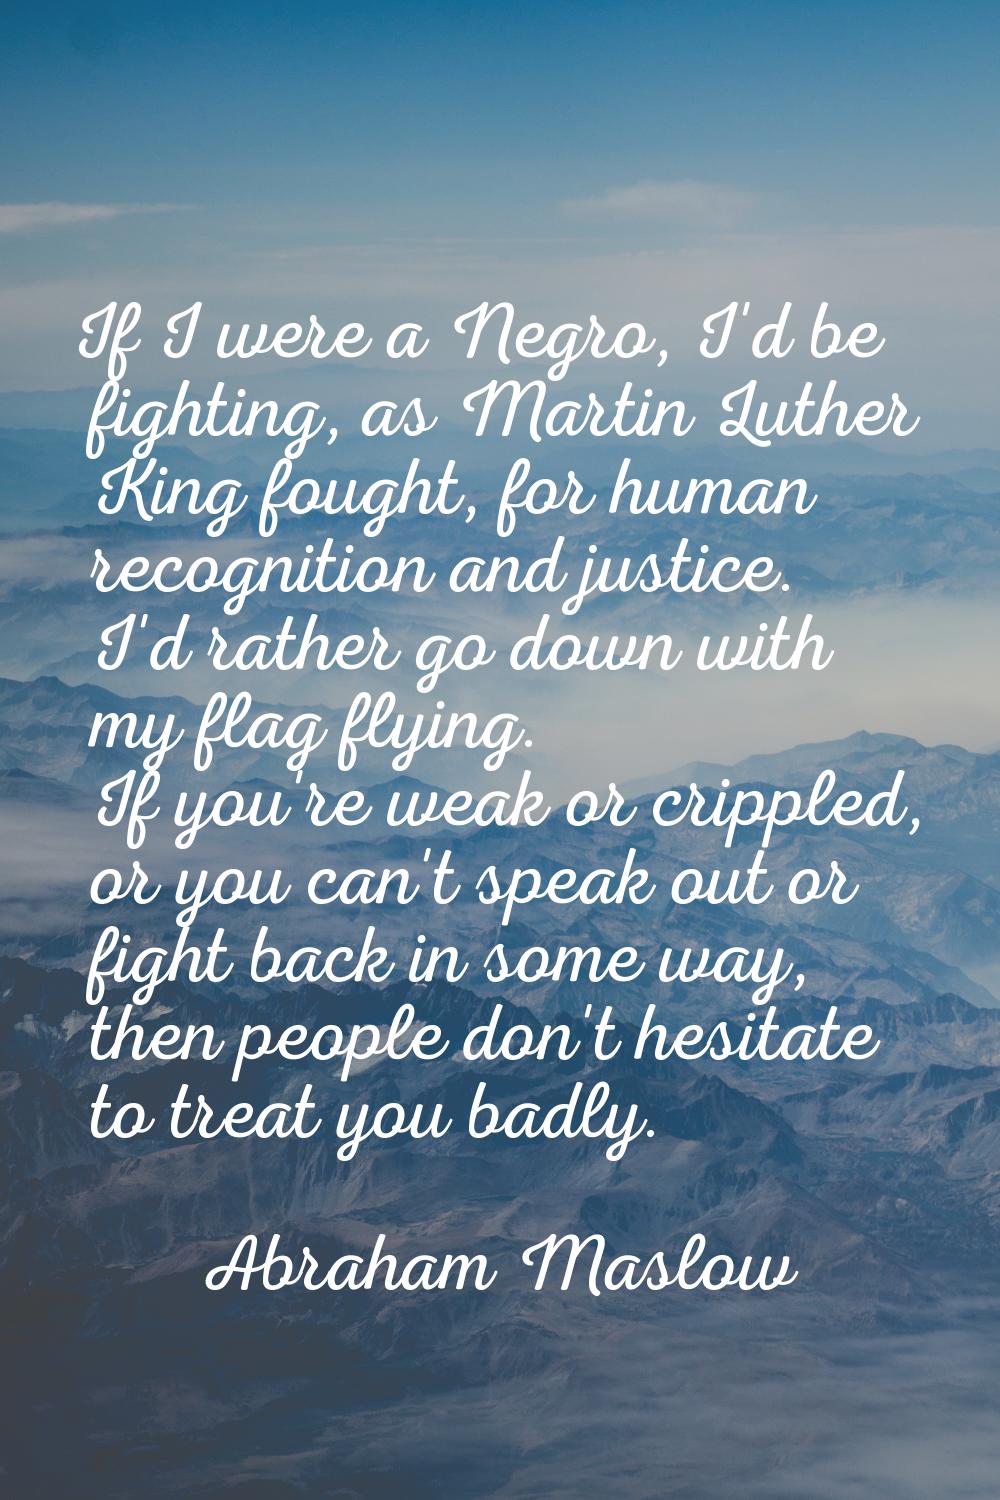 If I were a Negro, I'd be fighting, as Martin Luther King fought, for human recognition and justice